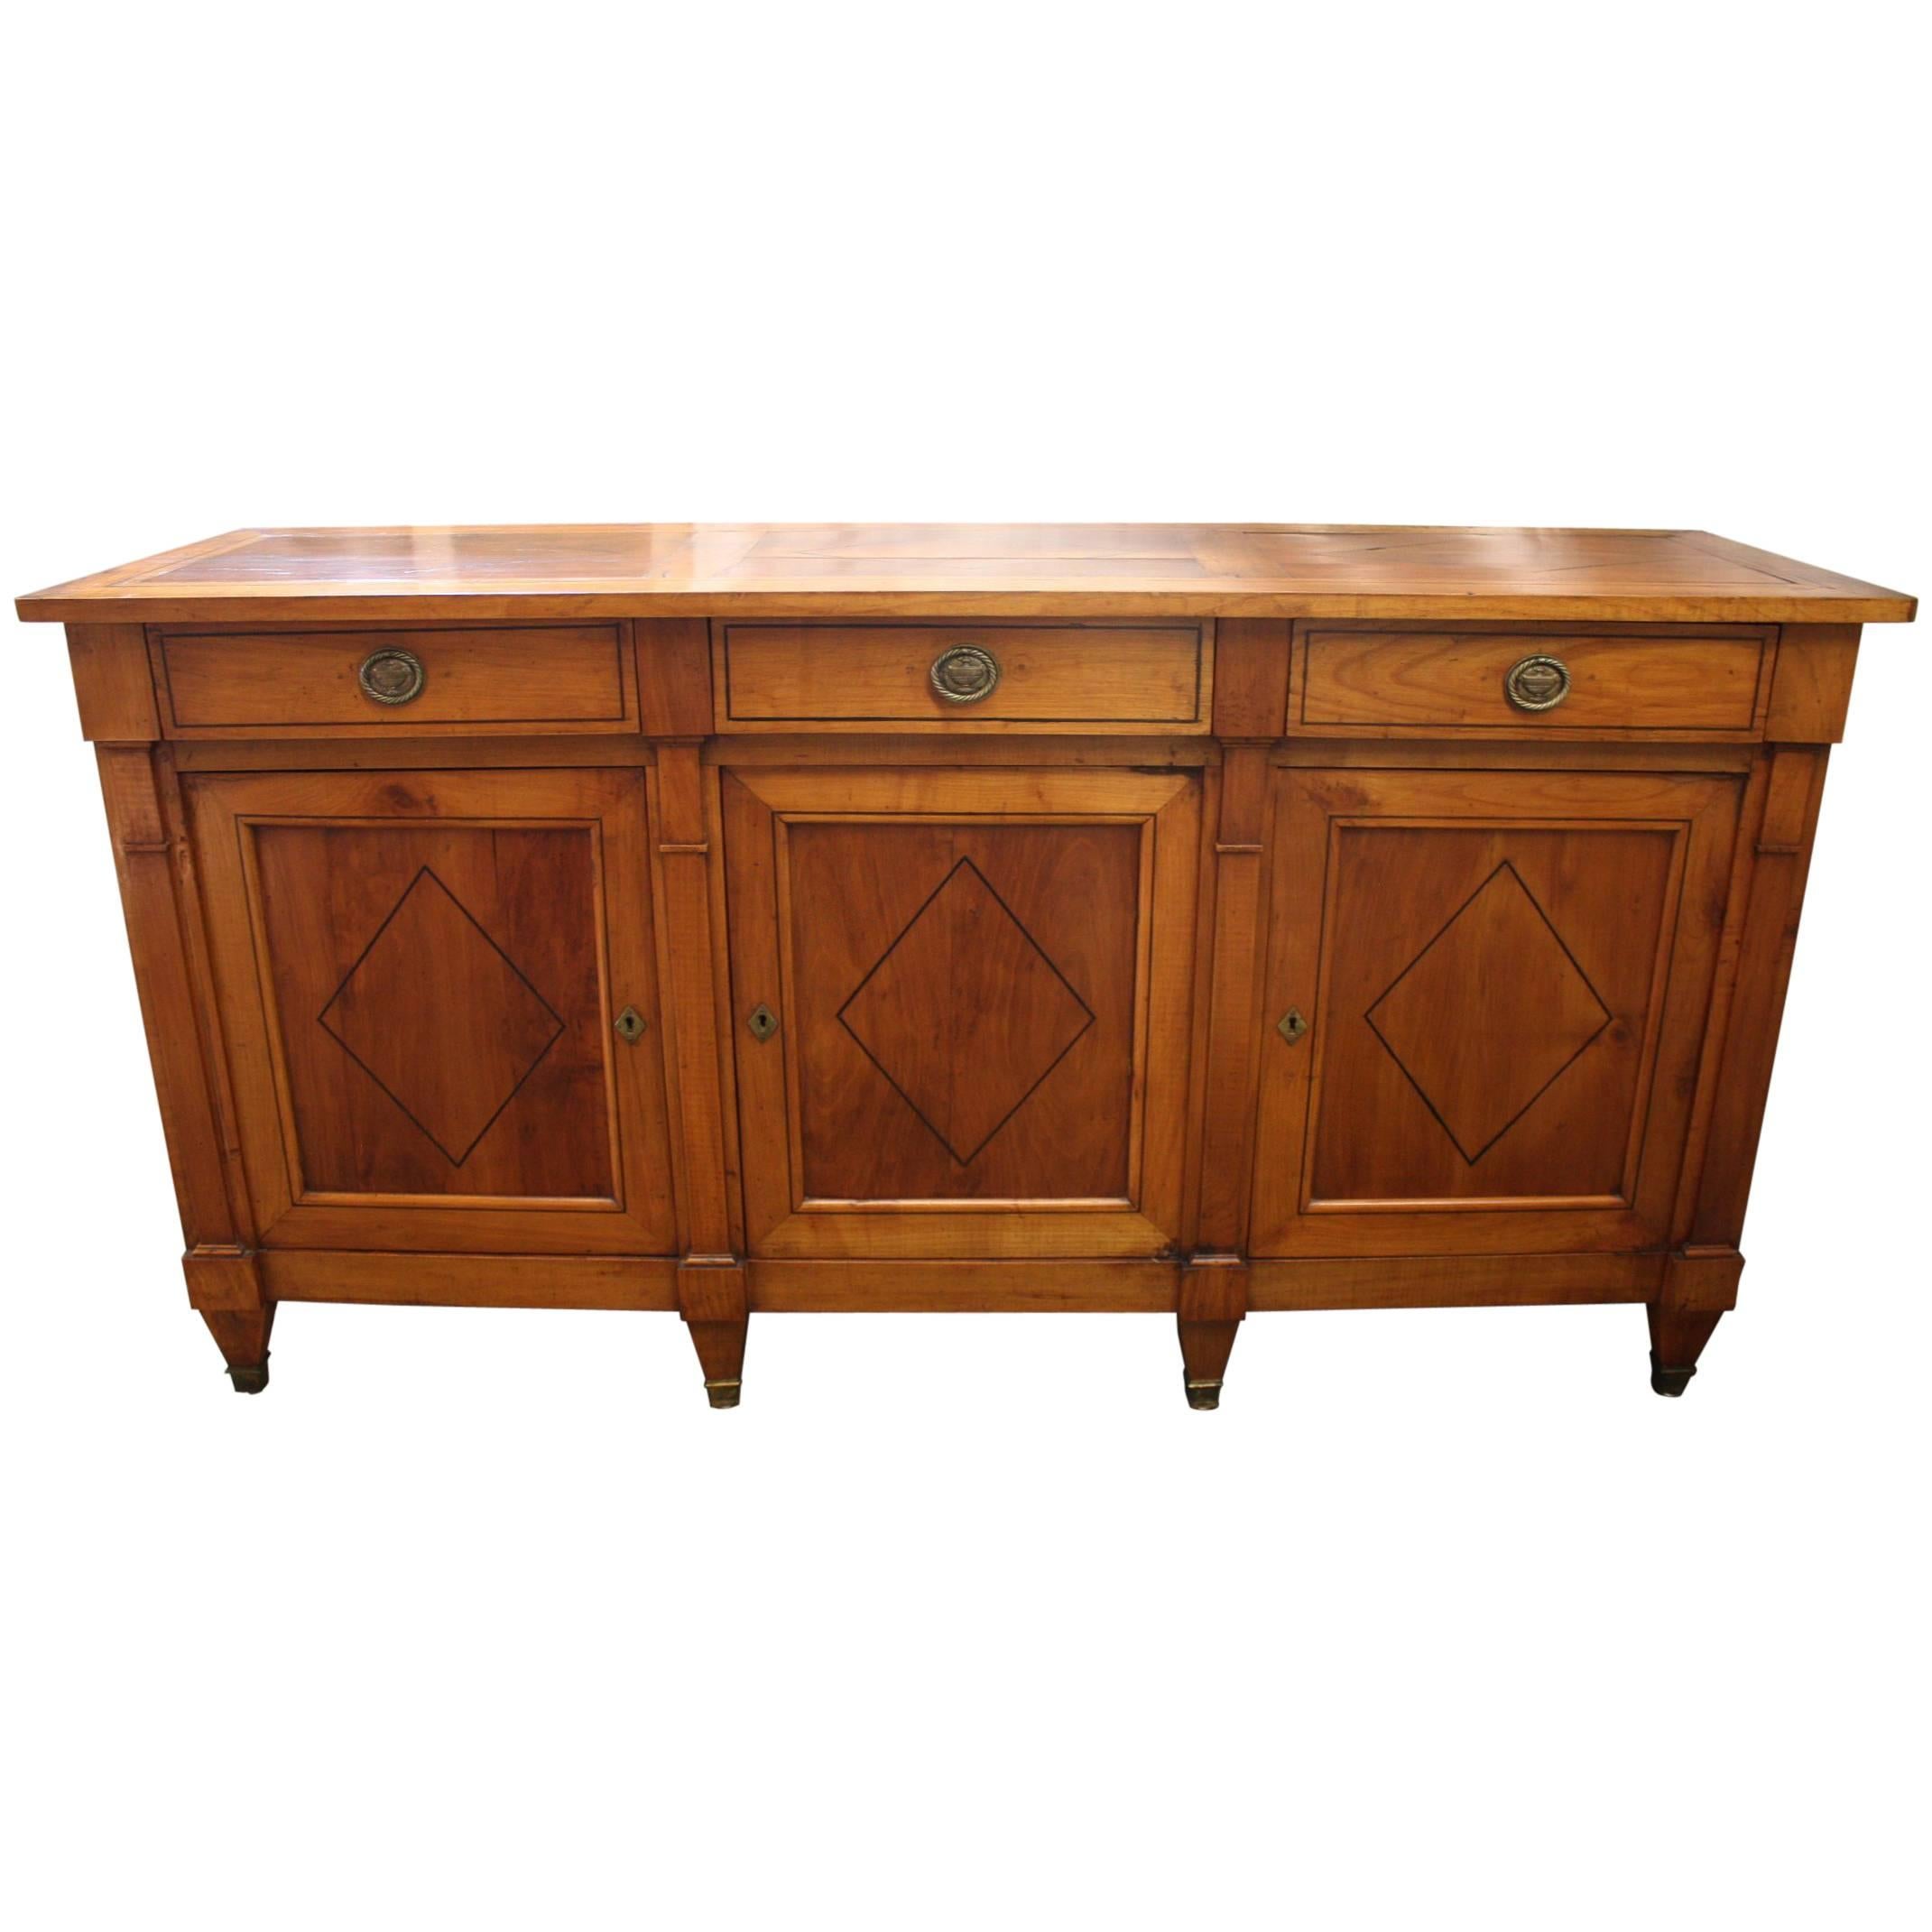 French Directoire Period Sideboard